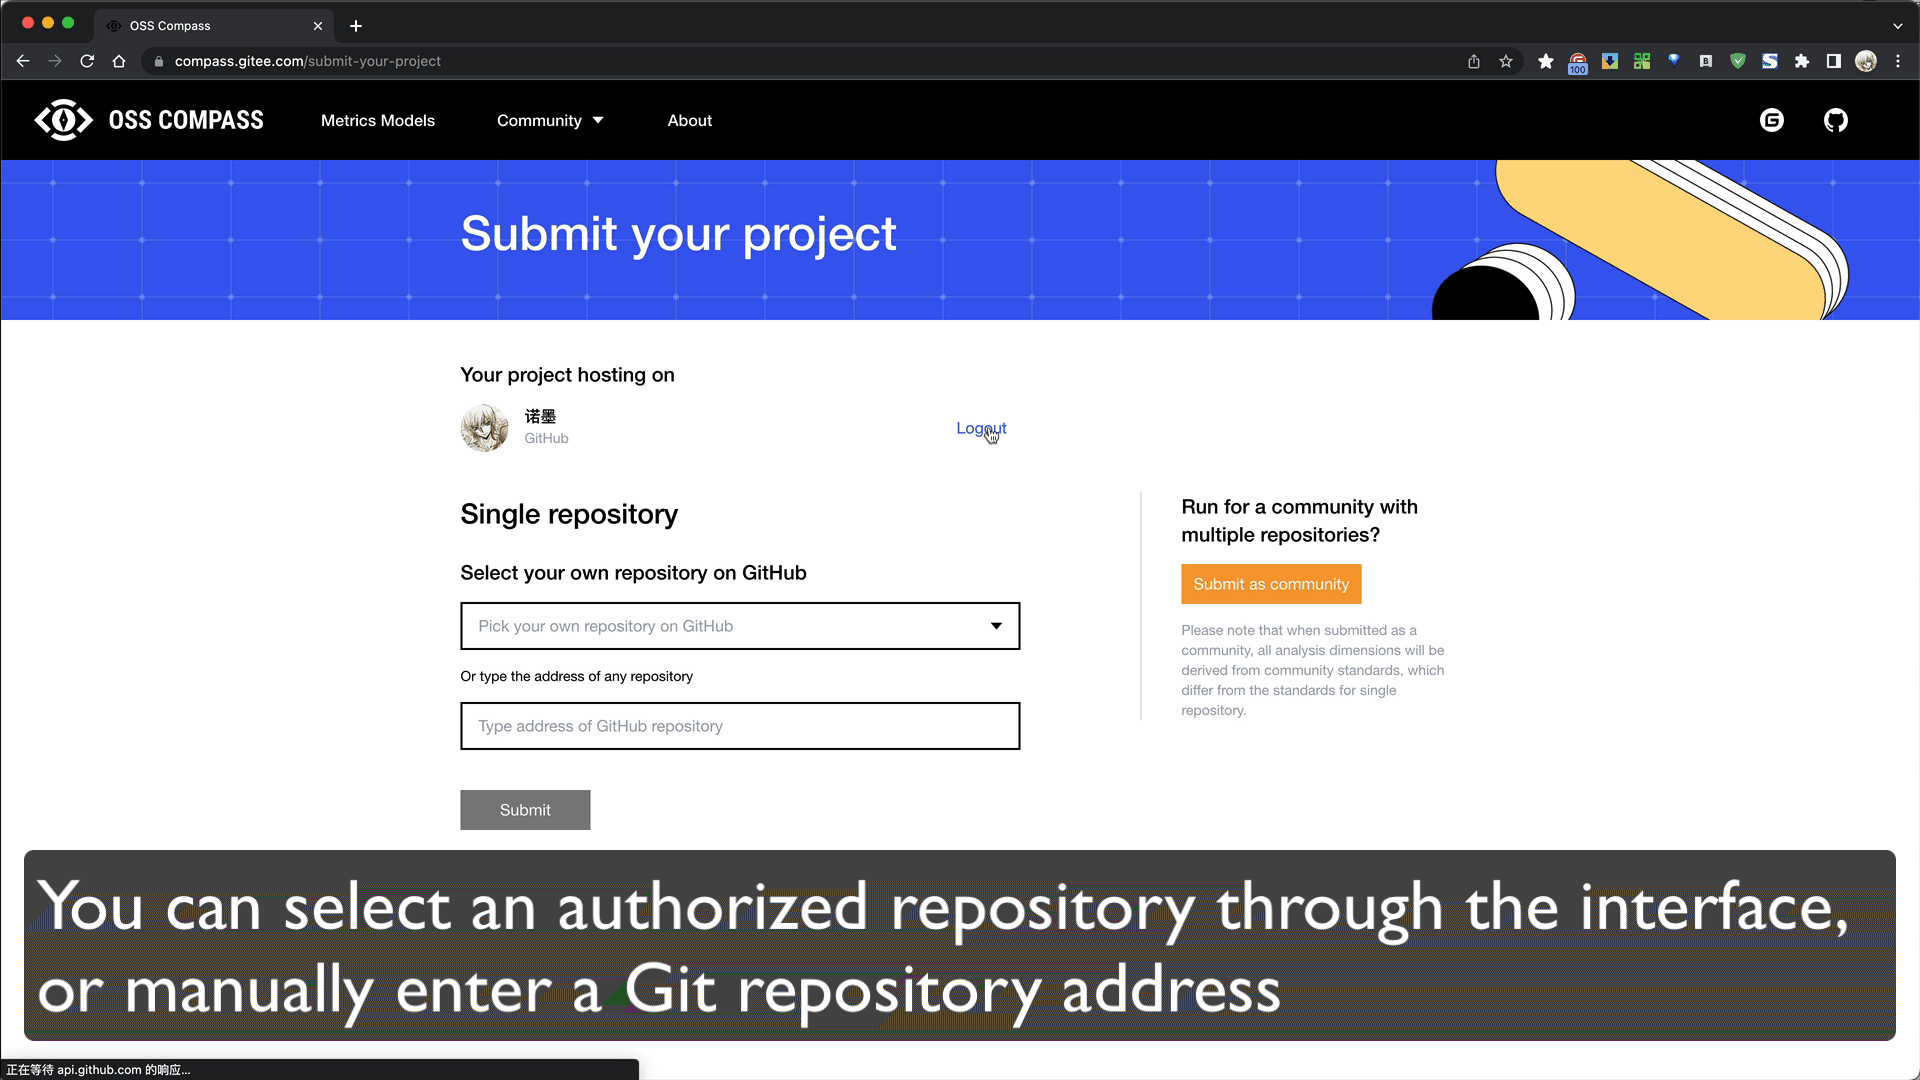 Submit as Single repository